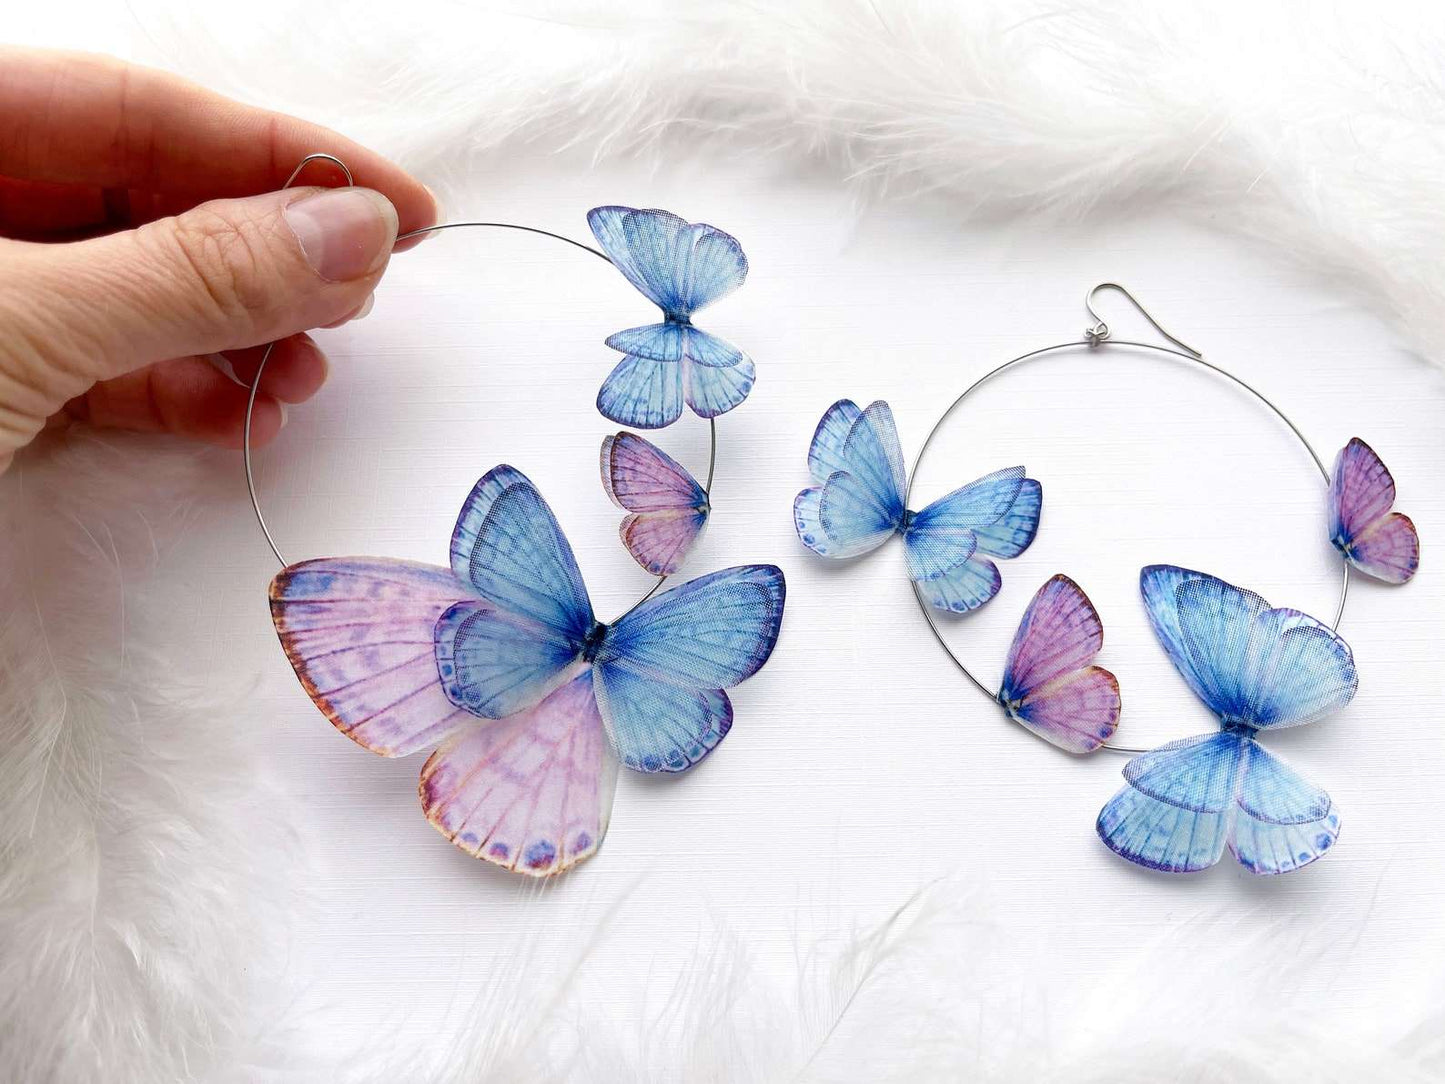 Handcrafted Boho Hoop Earrings with Faux Butterflies on White Background